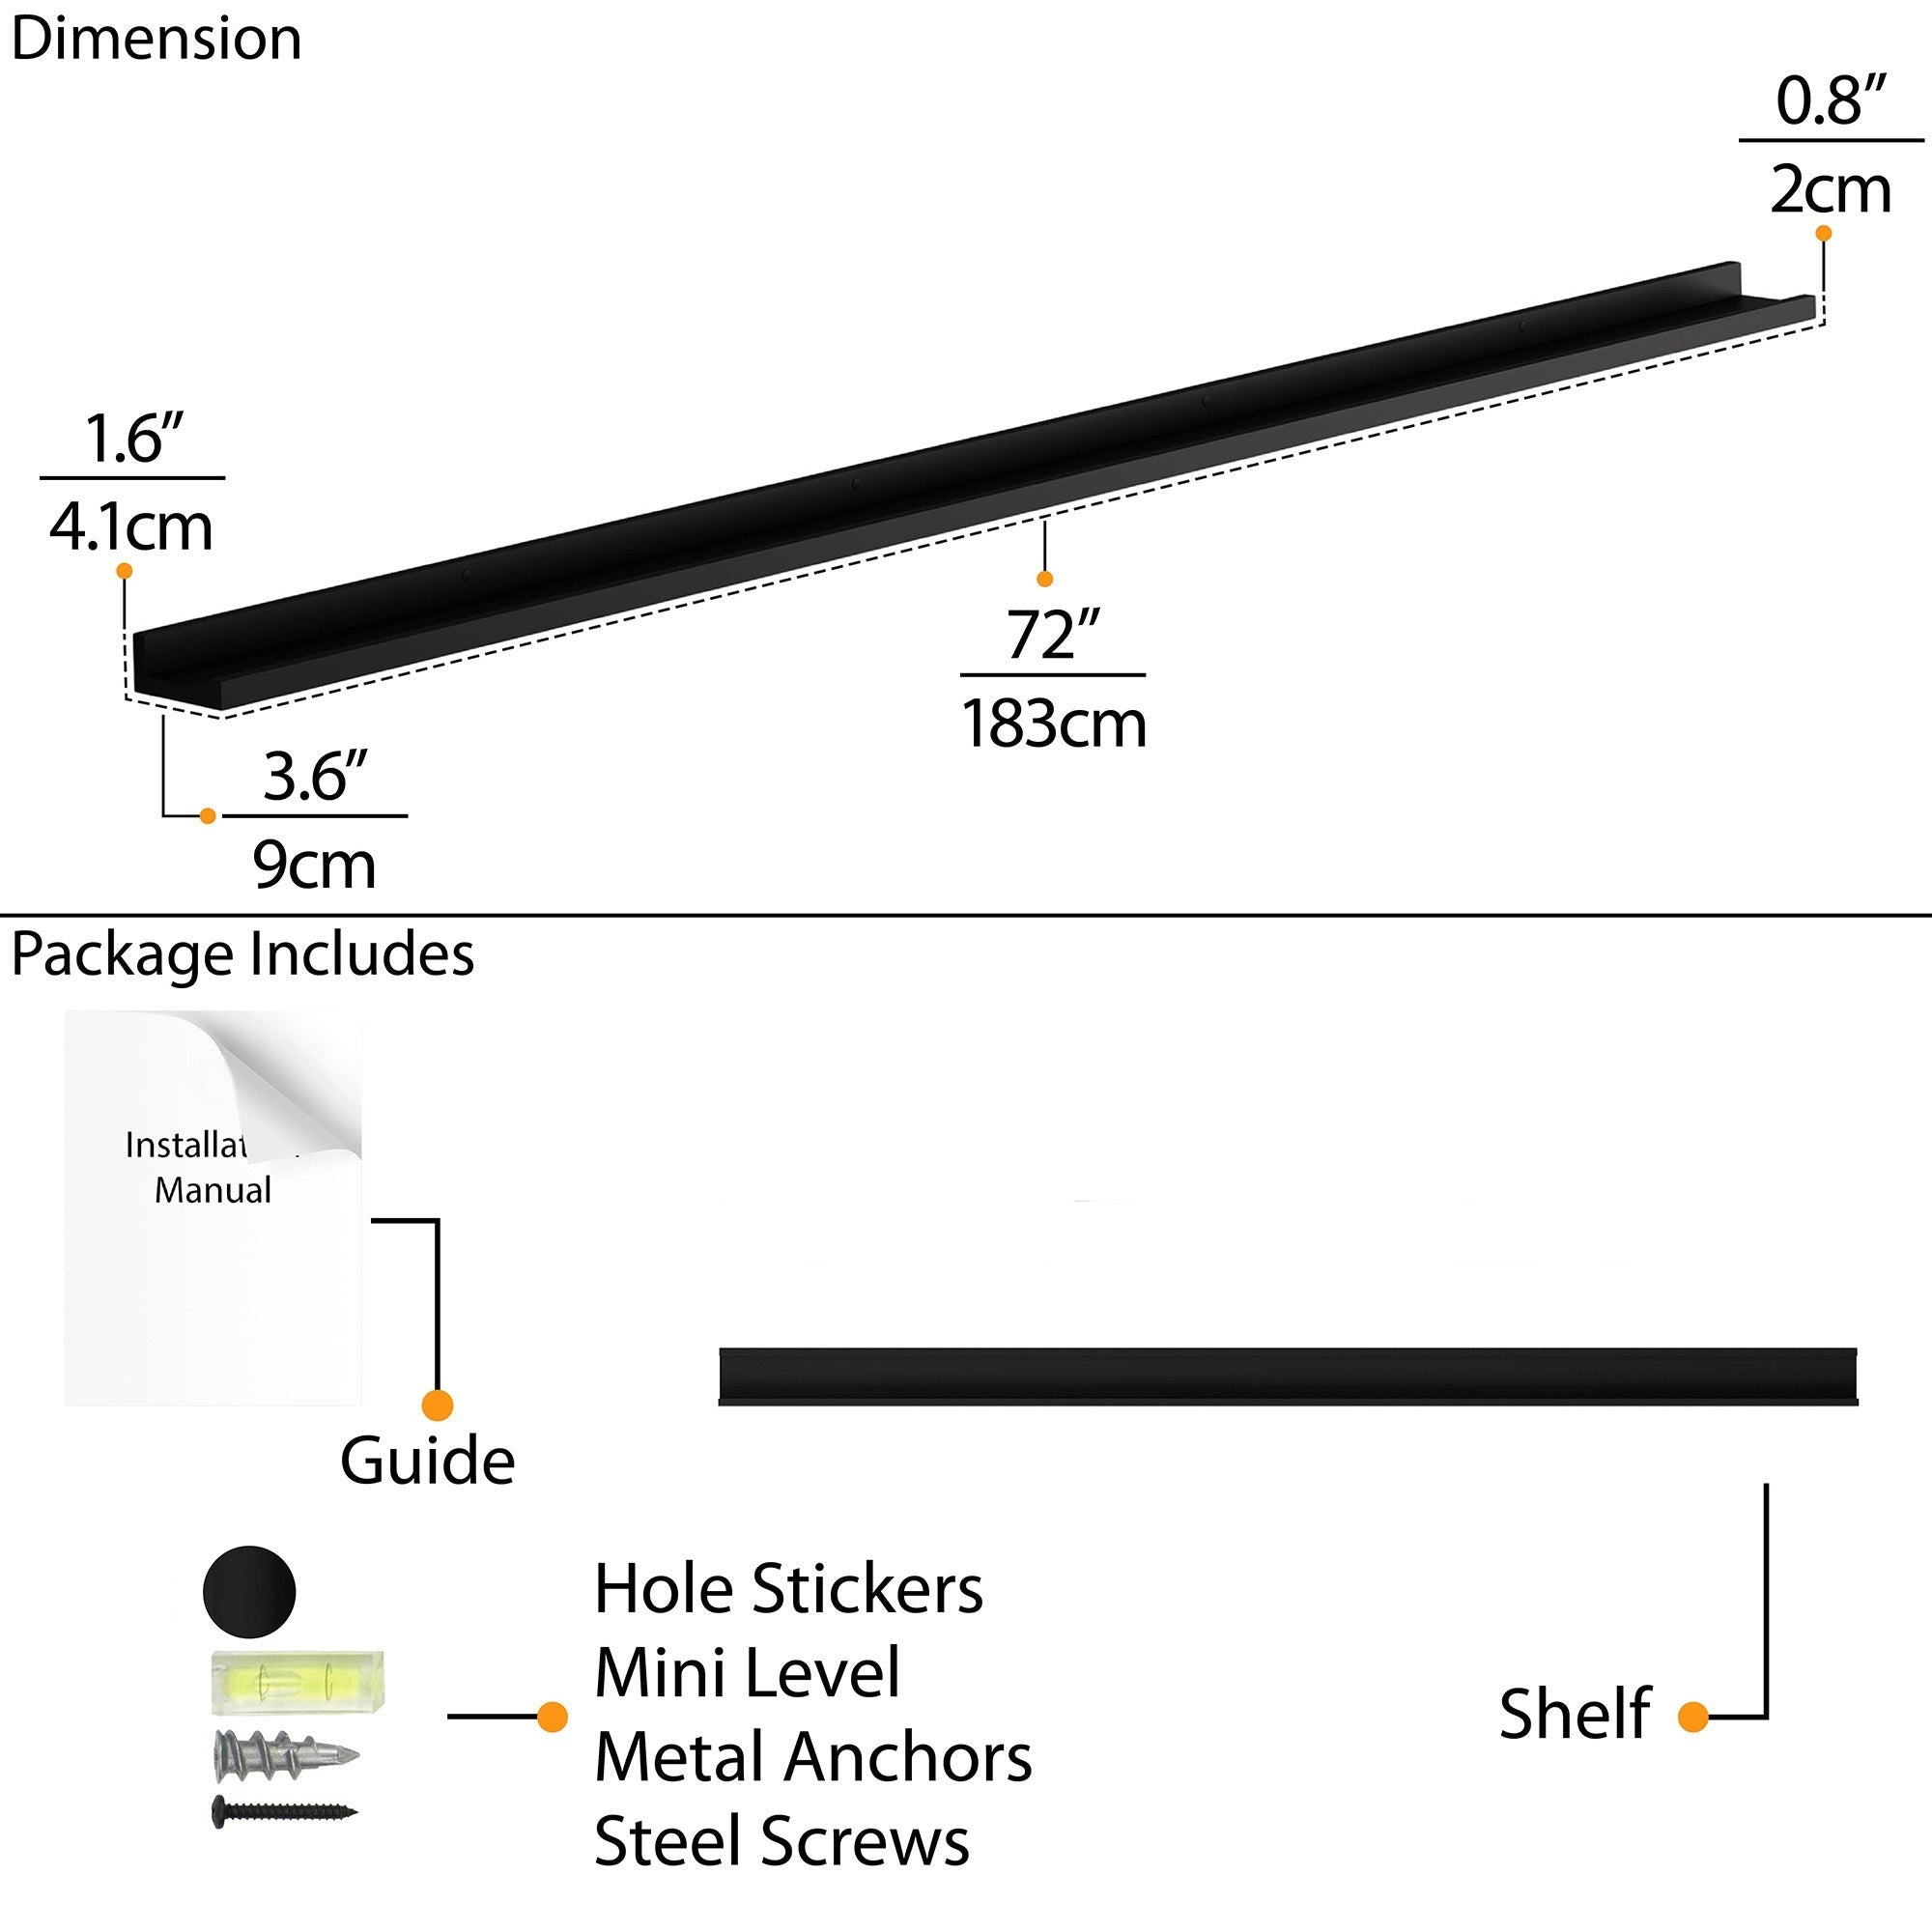 Technical specifications of a 72" black wooden wall shelf, including dimensions and components for installation.